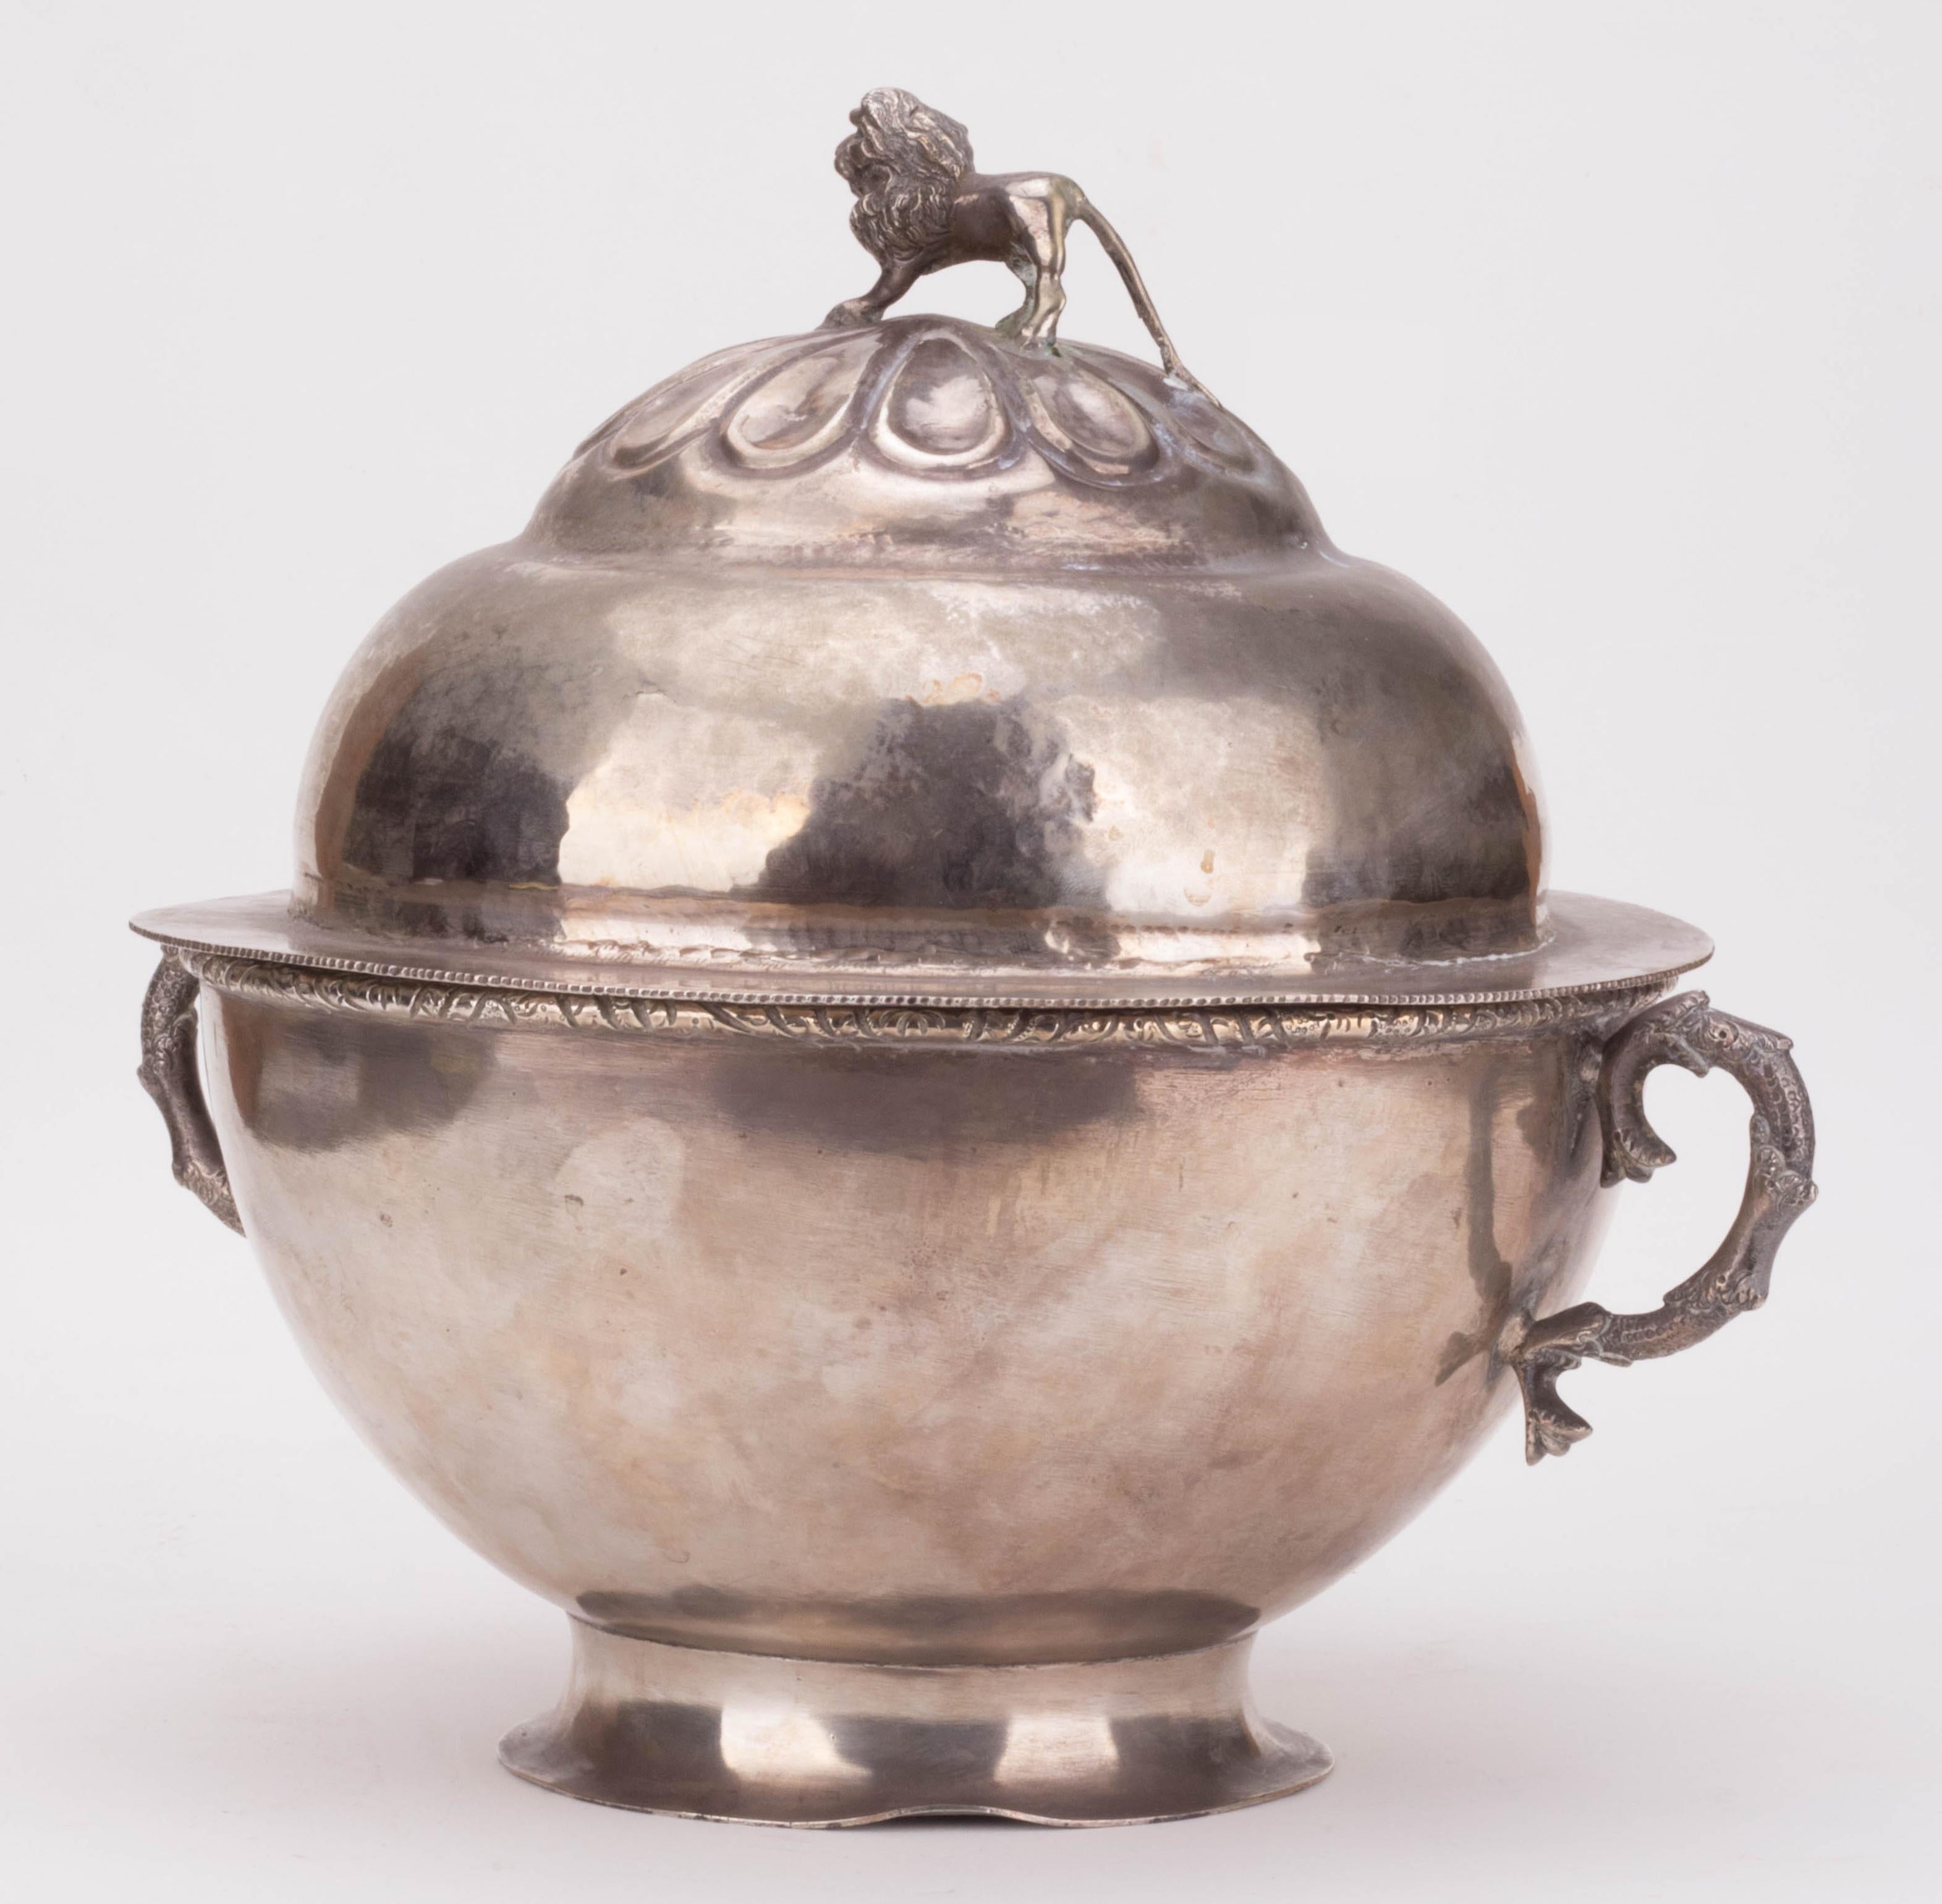 1780s colonial Peruvian globe shaped tureen with lion shaped knob on lid and side handles. 

Silver by weight: 1.410 g.